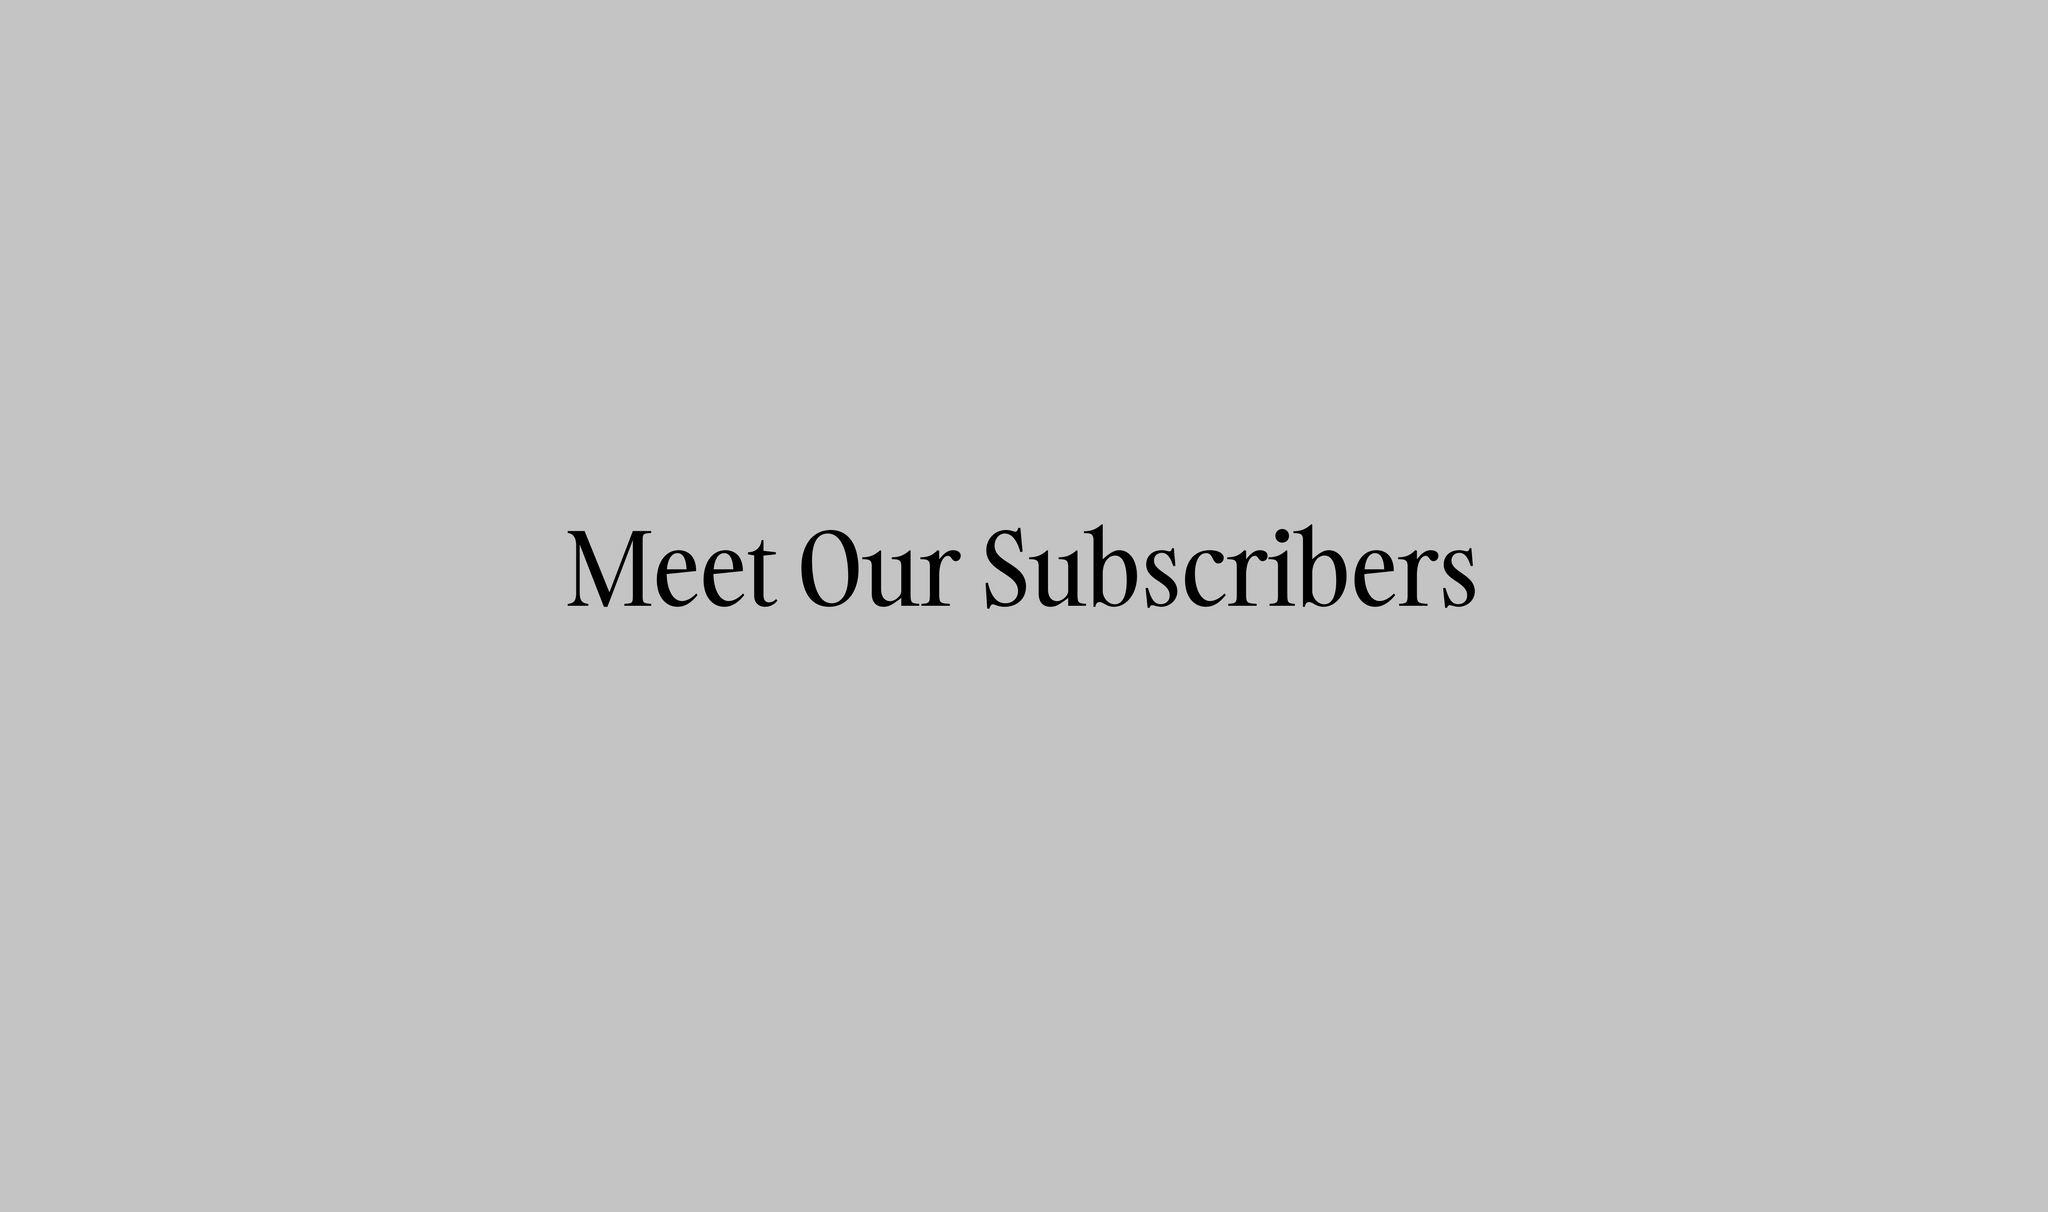 Meet Our Subscribers 2